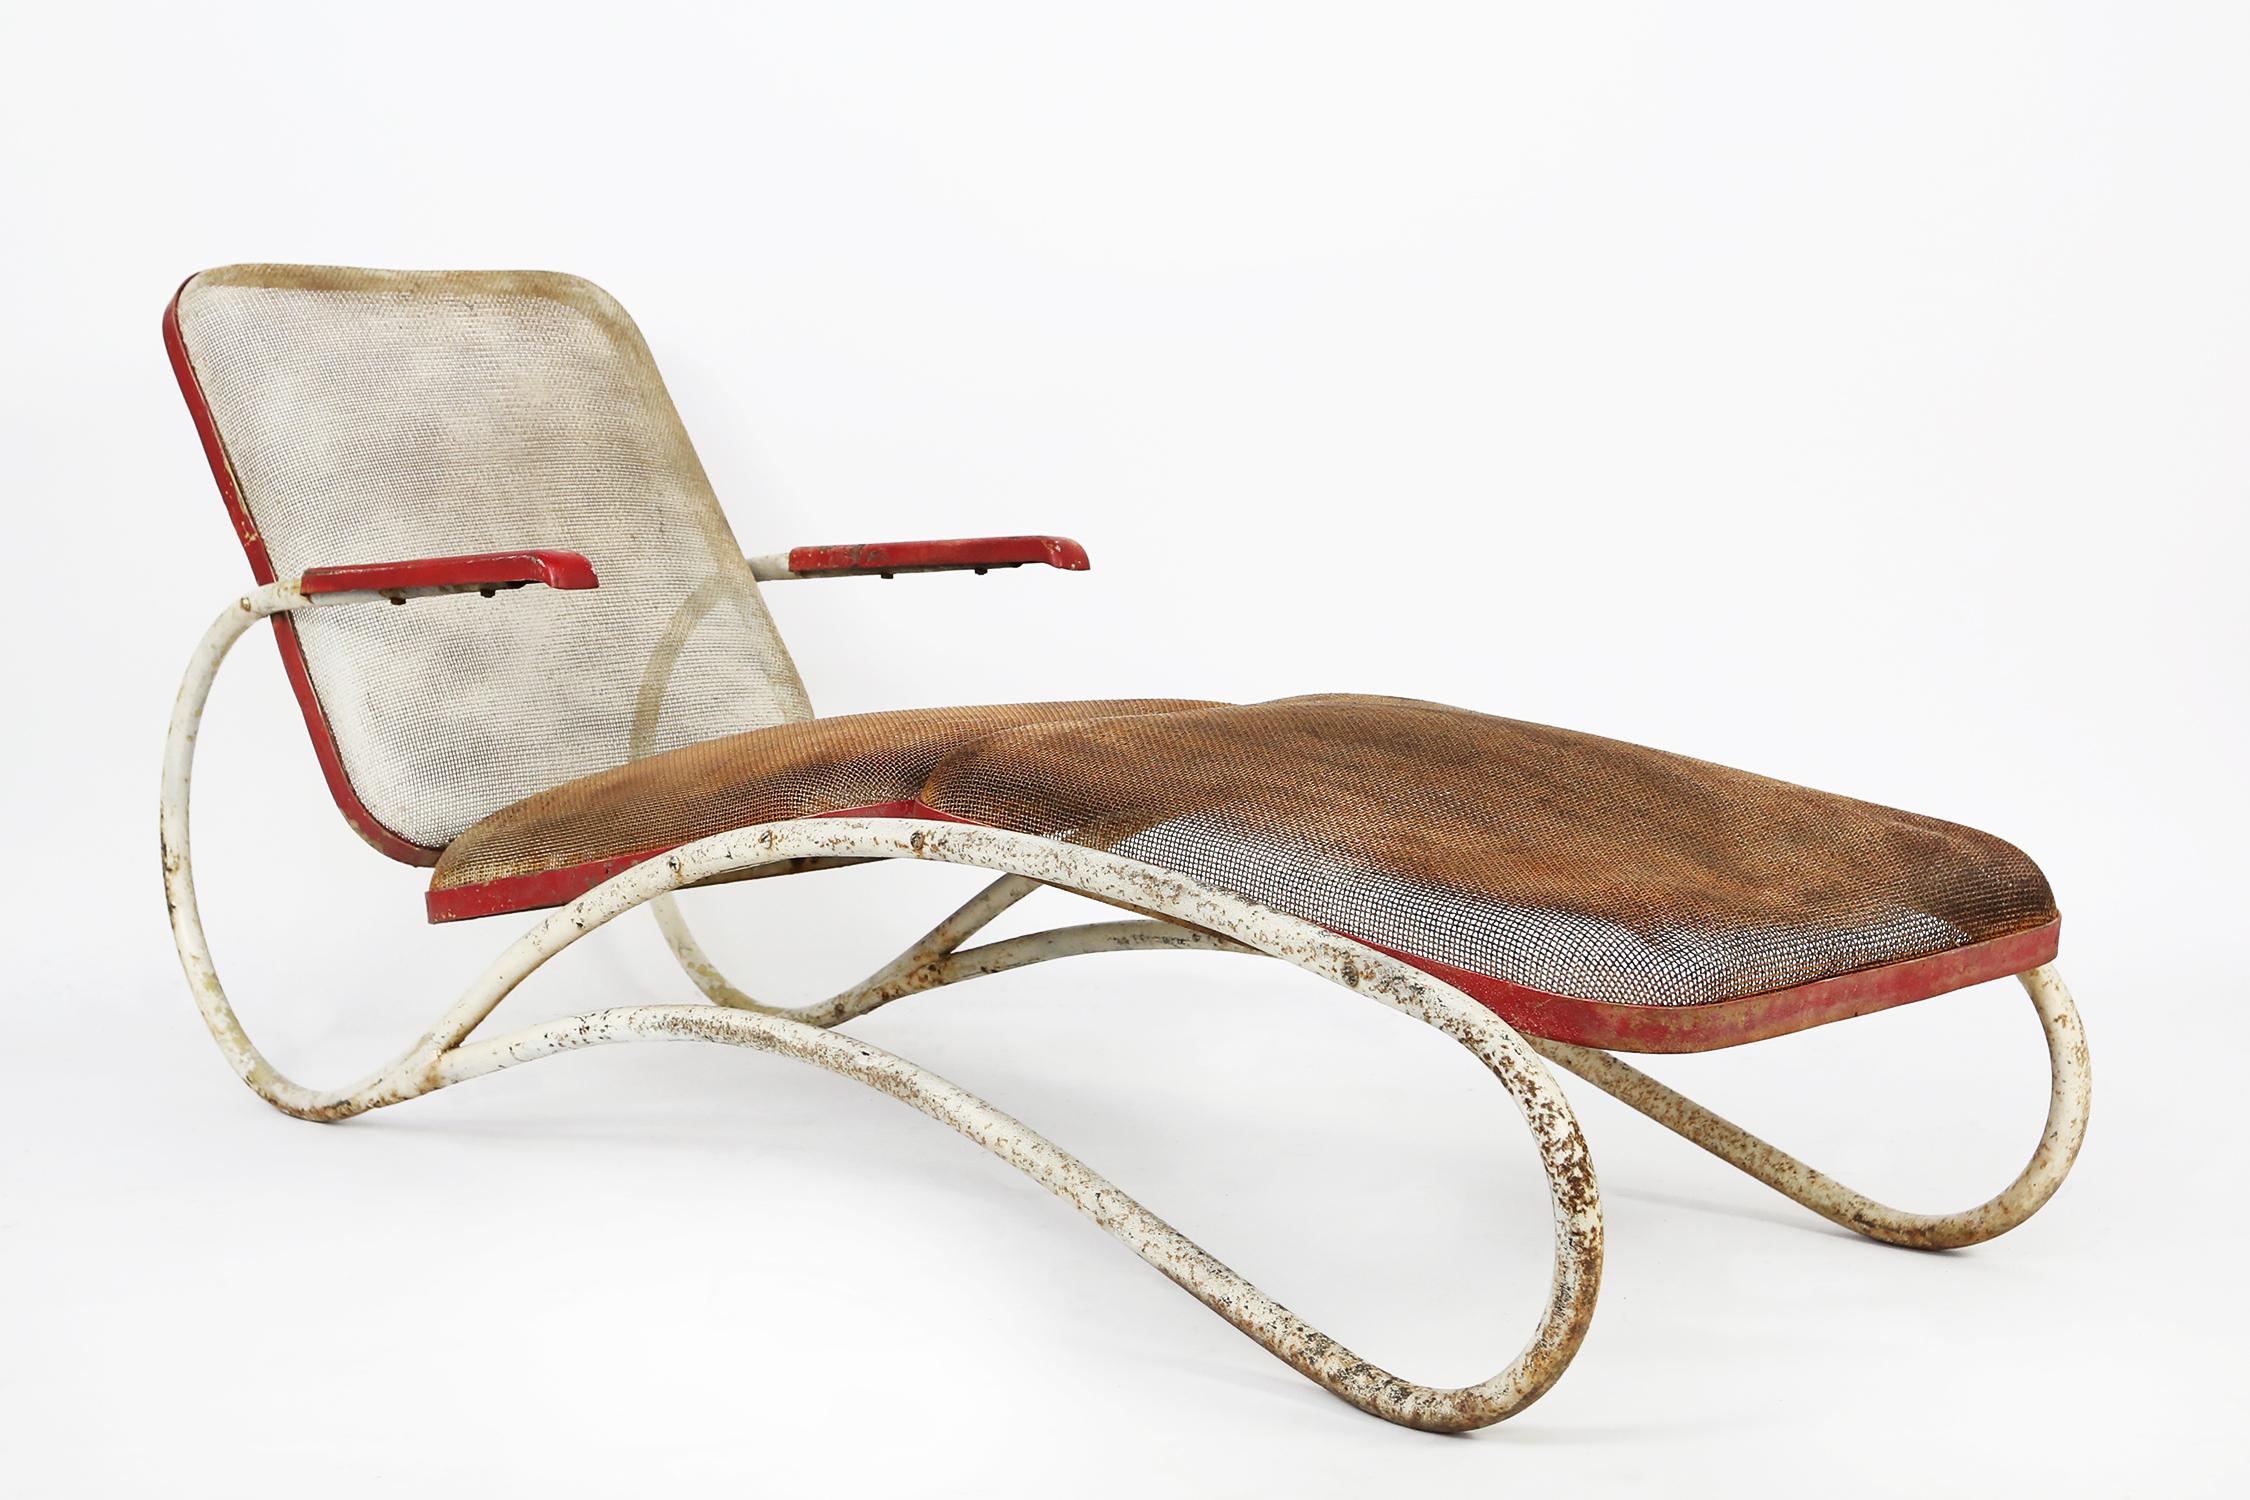 Modernist Metal Chaise Lounge or Lounge Chair, 1940s For Sale 1